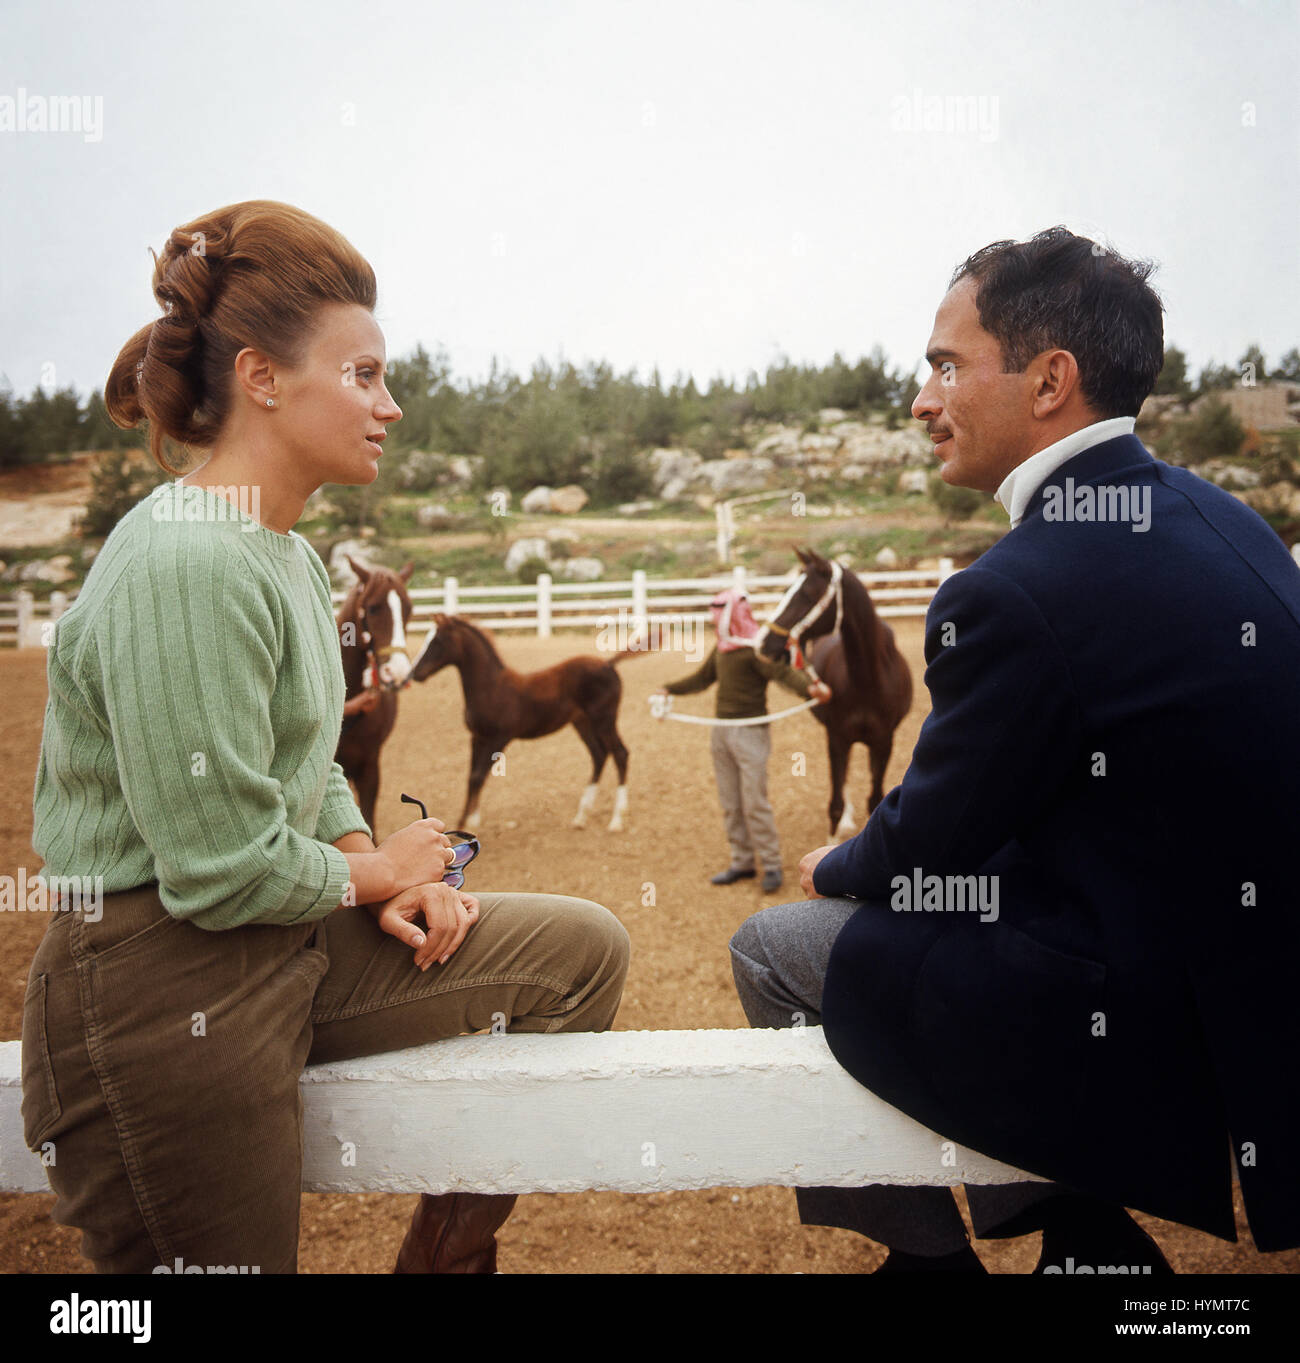 HUSSEIN bin Talal al-Hashemi 1970 King of Jordan with wife British  Antoinette Avril Gardiner with married name Muna at the horse paddock Stock  Photo - Alamy